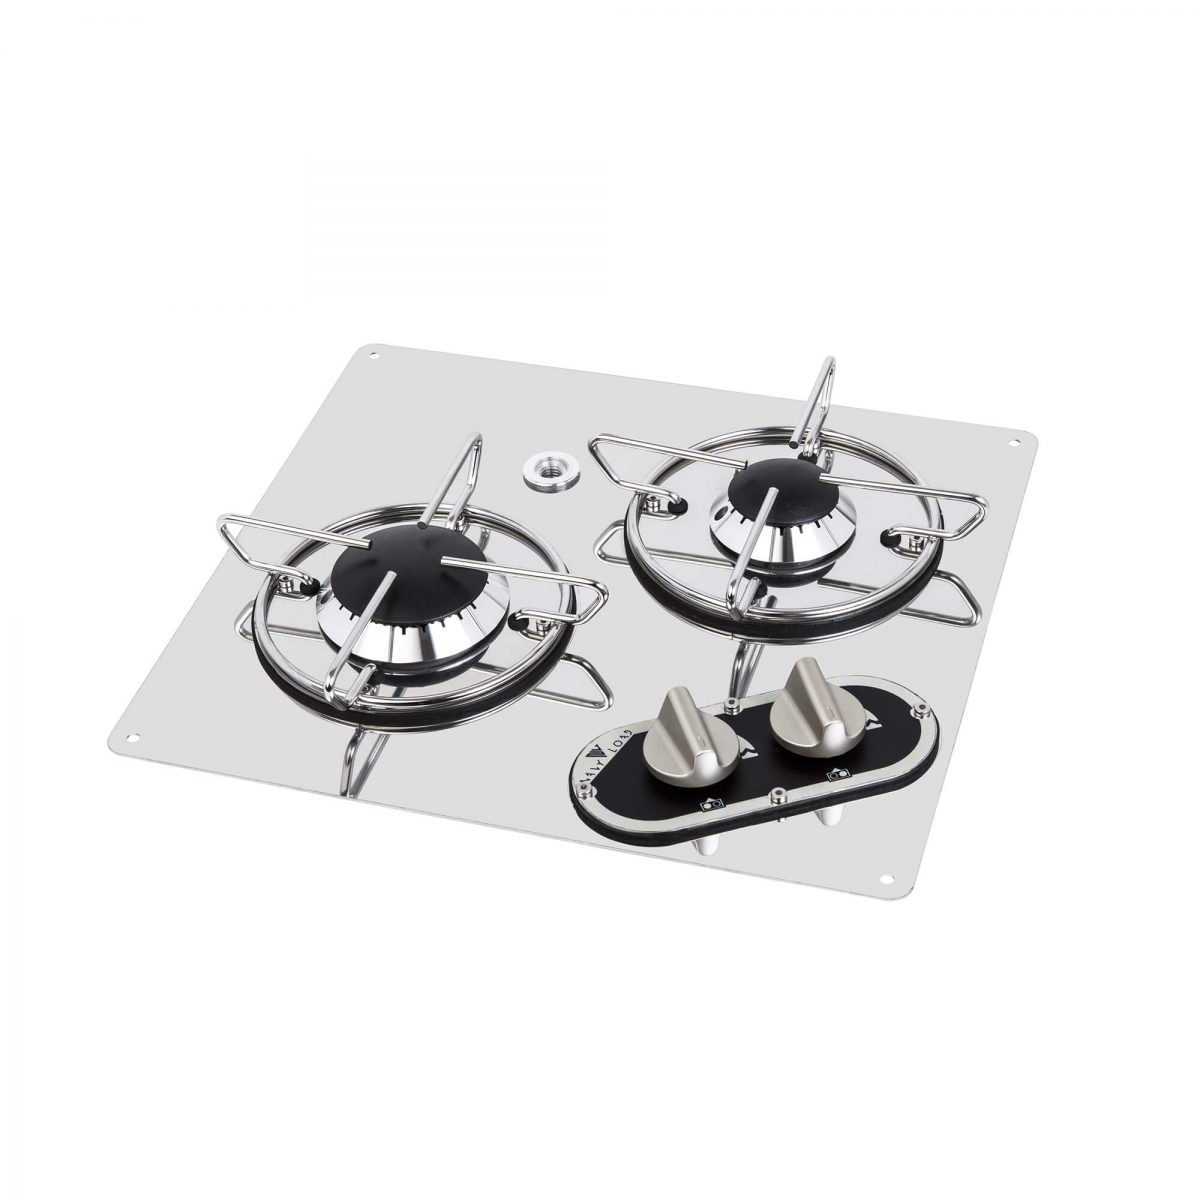 STAINLESS STEEL BUILT-IN HOB UNIT , 2 BURNERS –  350×320